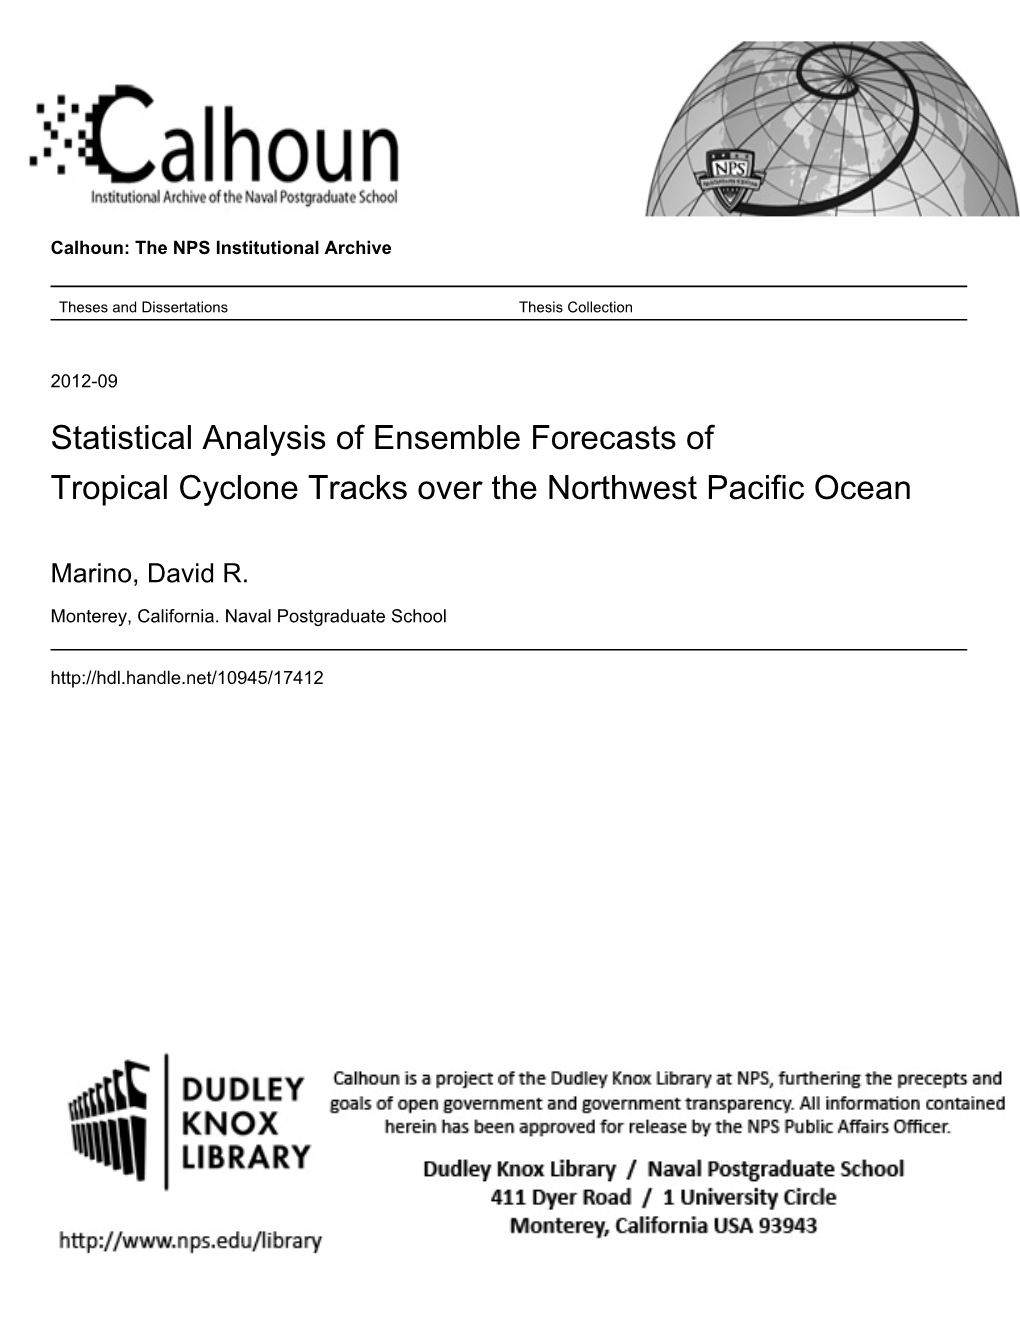 Statistical Analysis of Ensemble Forecasts of Tropical Cyclone Tracks Over the Northwest Pacific Ocean